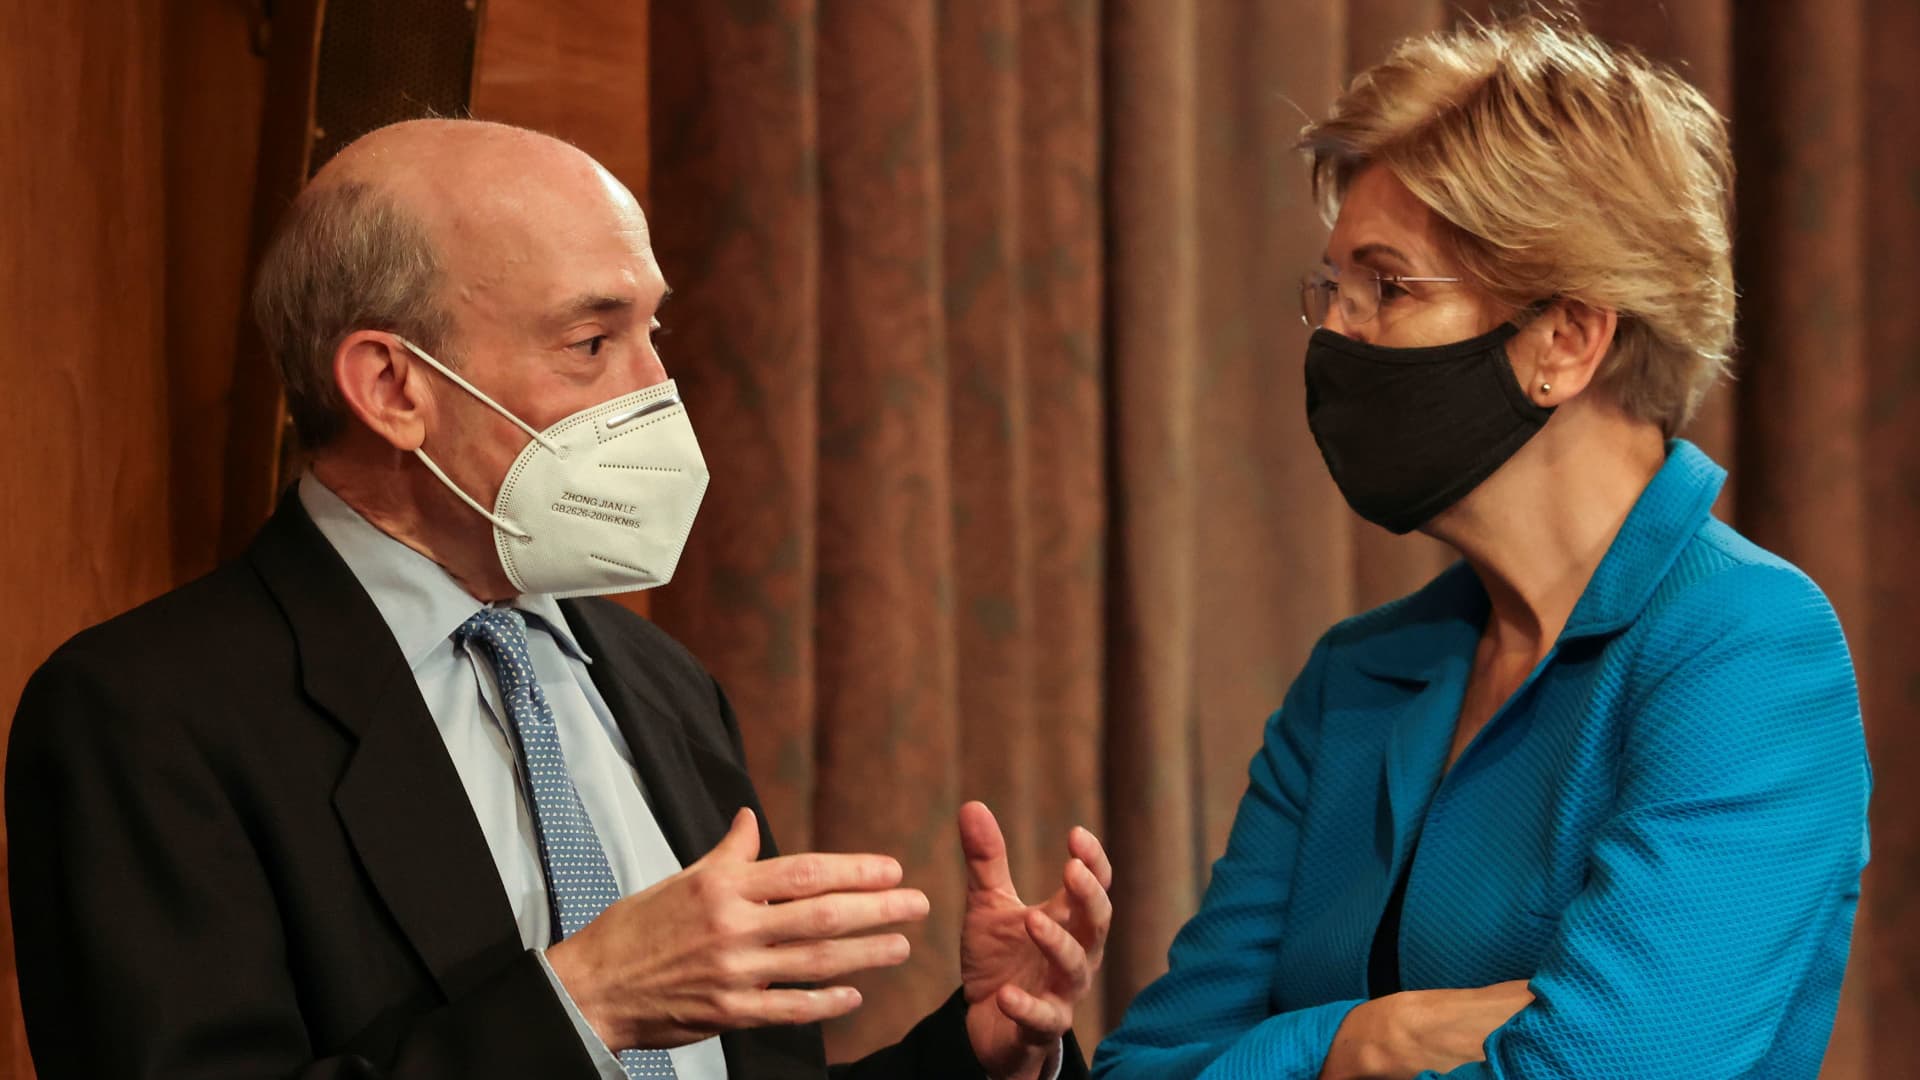 U.S. Securities and Exchange Commission (SEC) Chair Gary Gensler speaks with Senator Elizabeth Warren (D-MA) prior to testifying before a Senate Banking, Housing, and Urban Affairs Committee oversight hearing on the SEC on Capitol Hill in Washington, U.S., September 14, 2021.